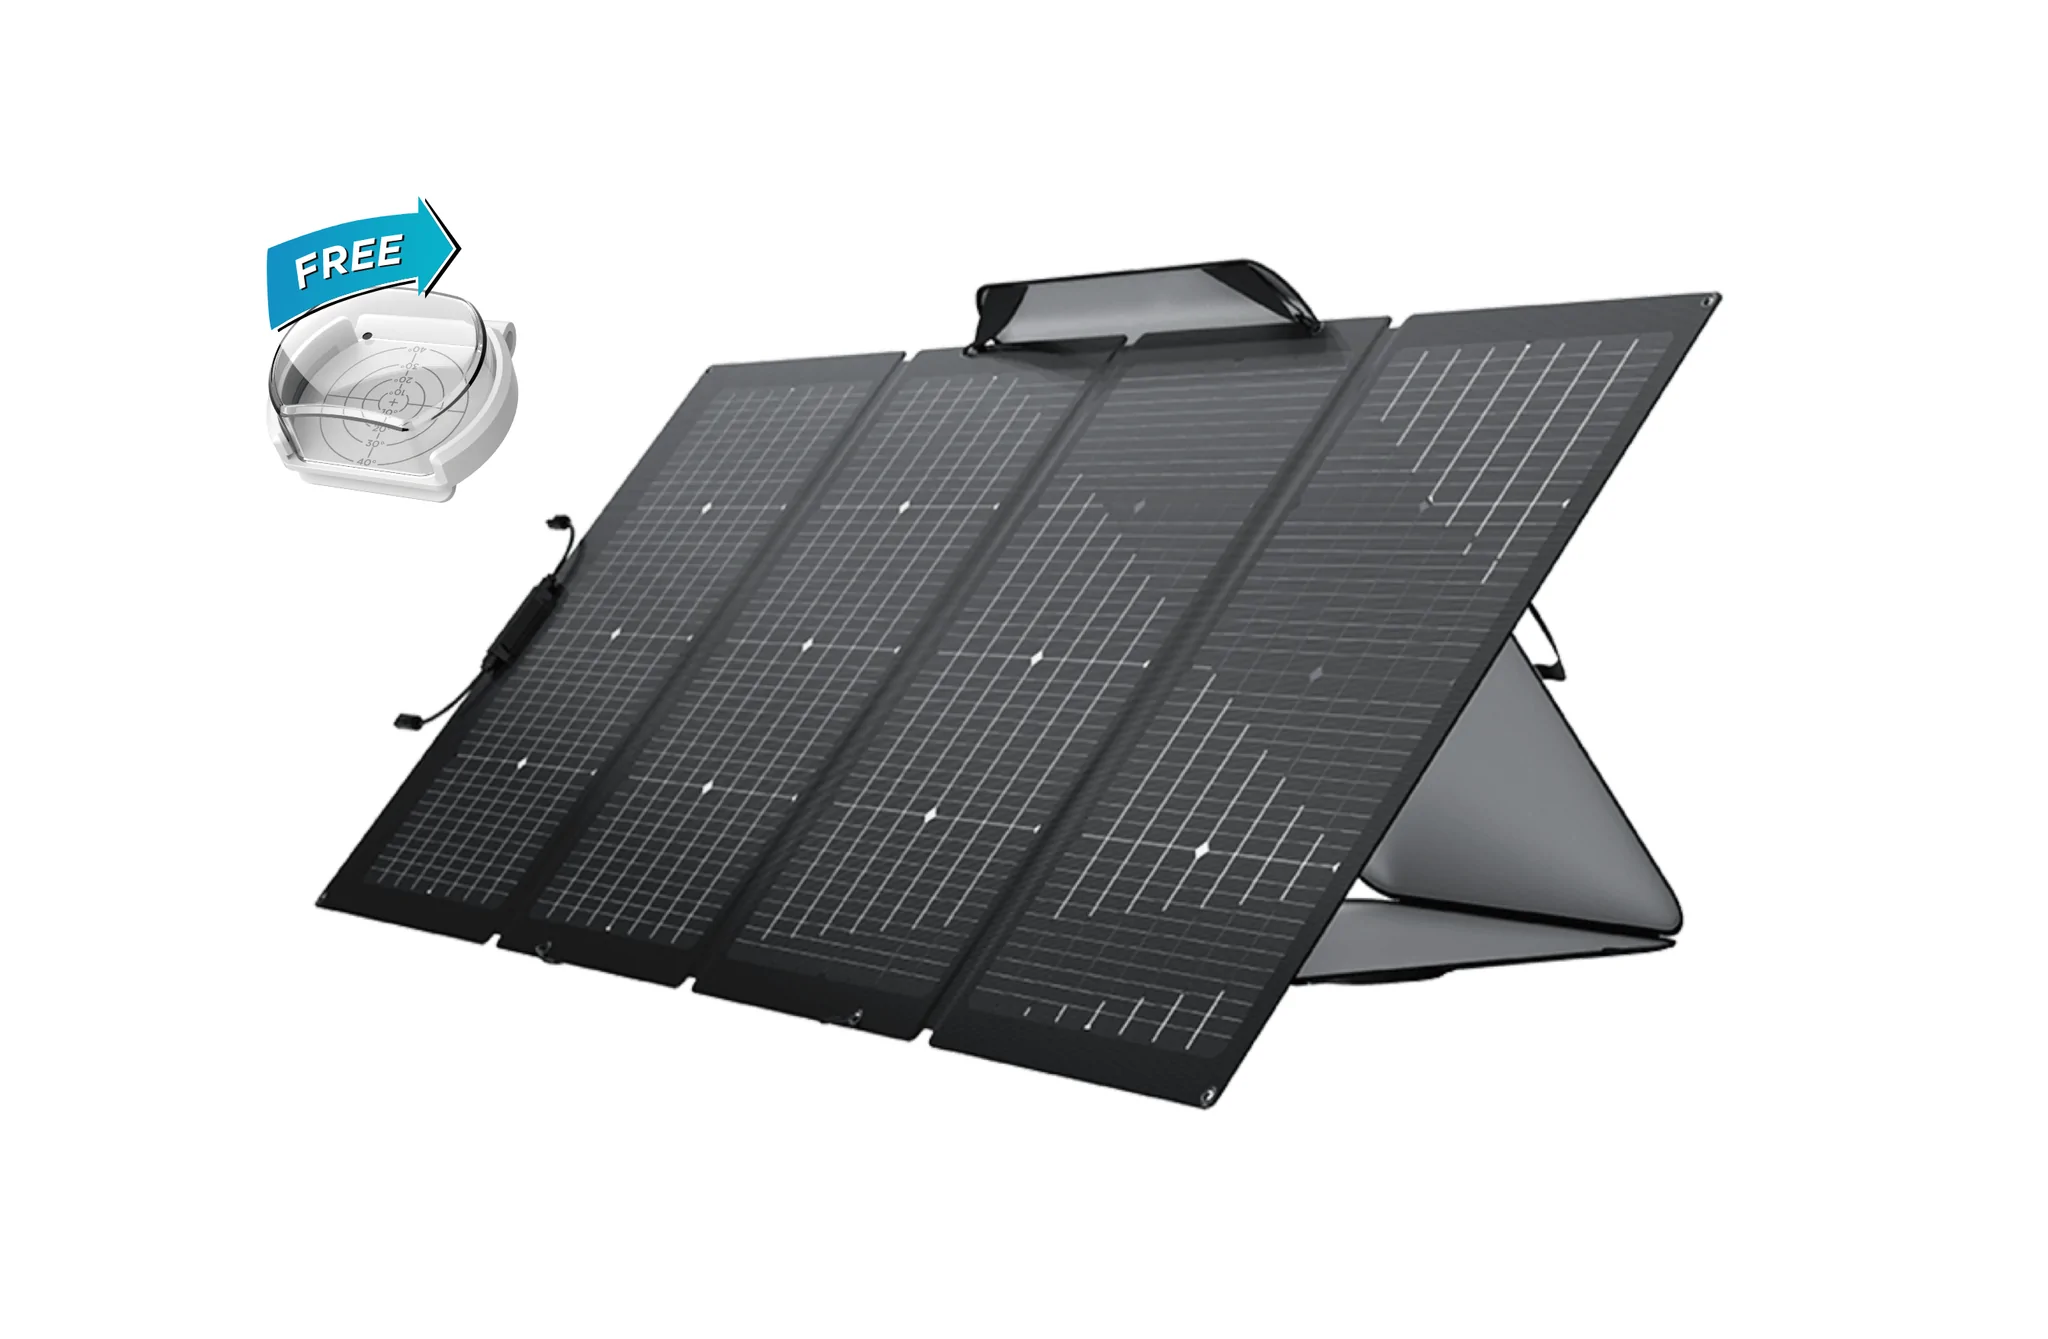 A portable solar panel with bifacial technology on a white background.